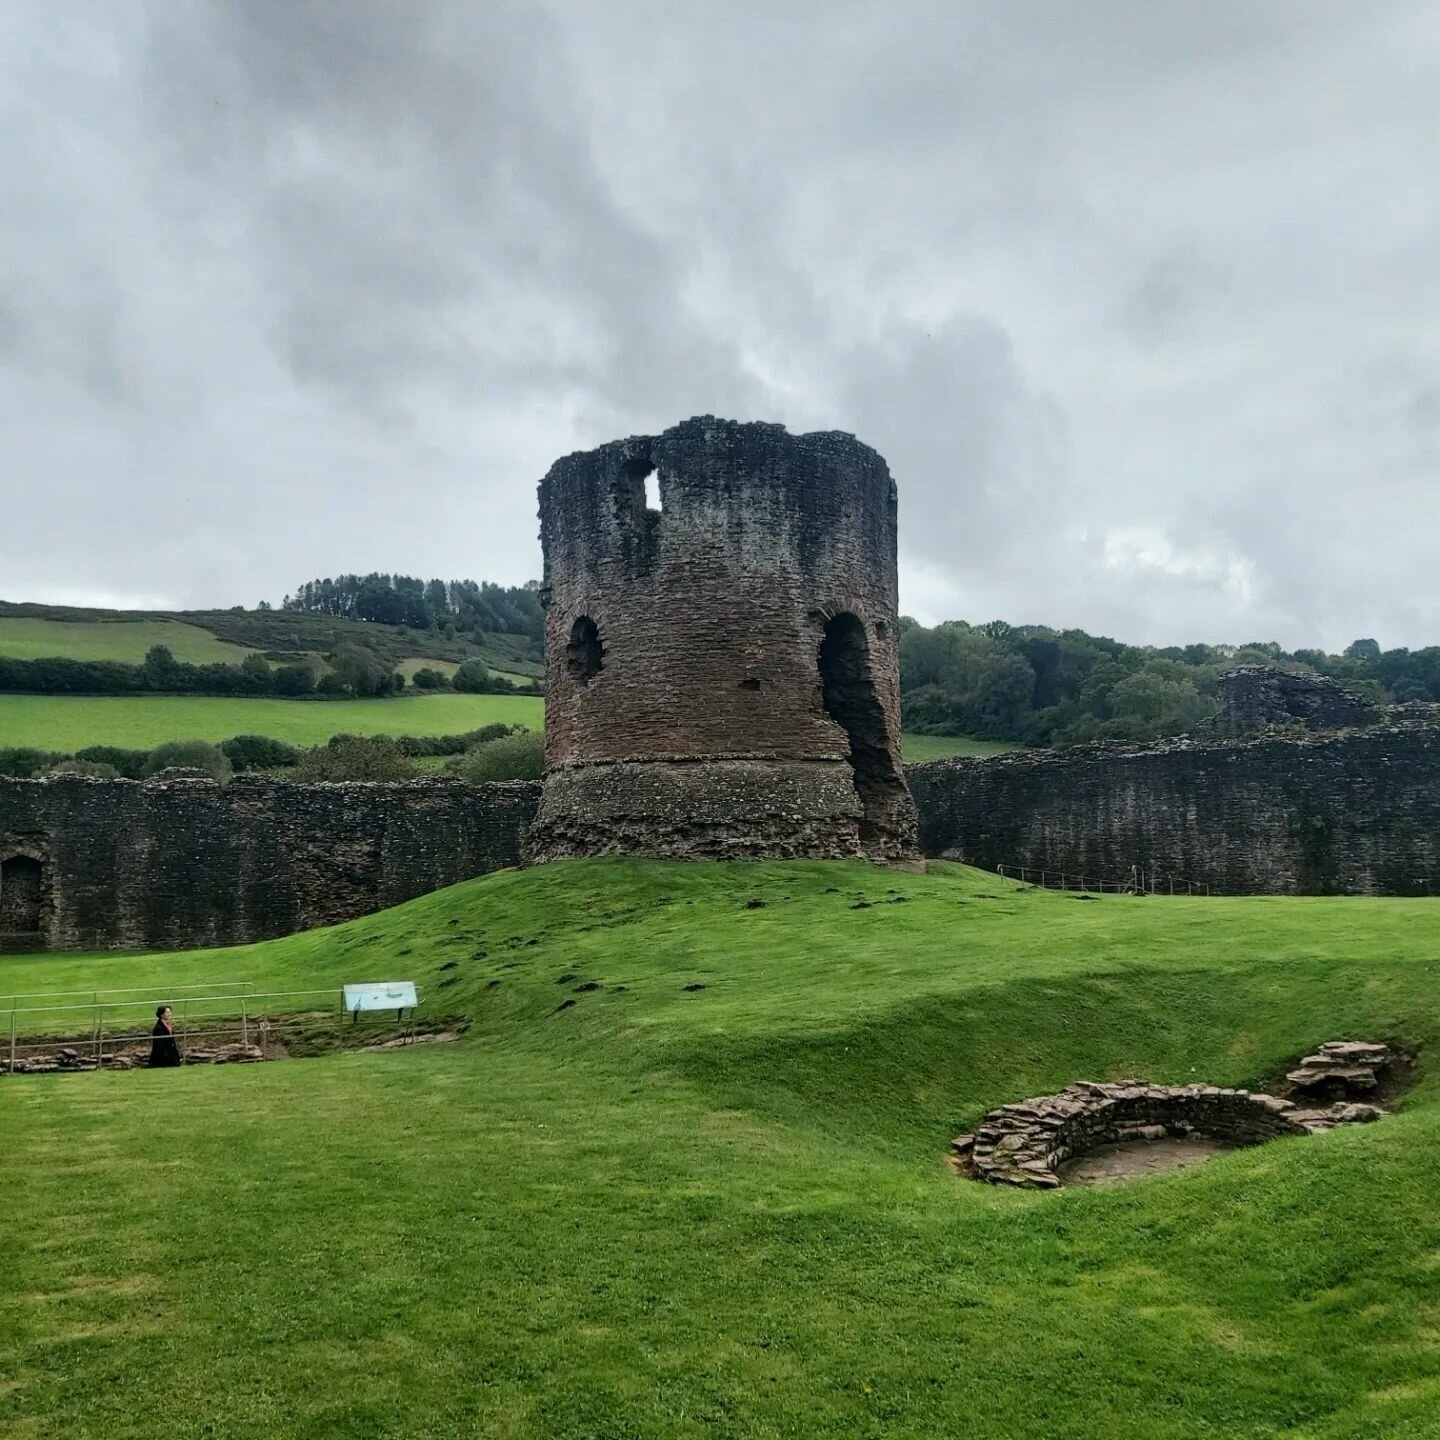 Have you ever been to Skenfrith Castle? Did you know that back in the day the water gate door led to a wharf where large ships moored up beside the castle to be unloaded? You can go through the water gate door today and walk along the bank of the riv